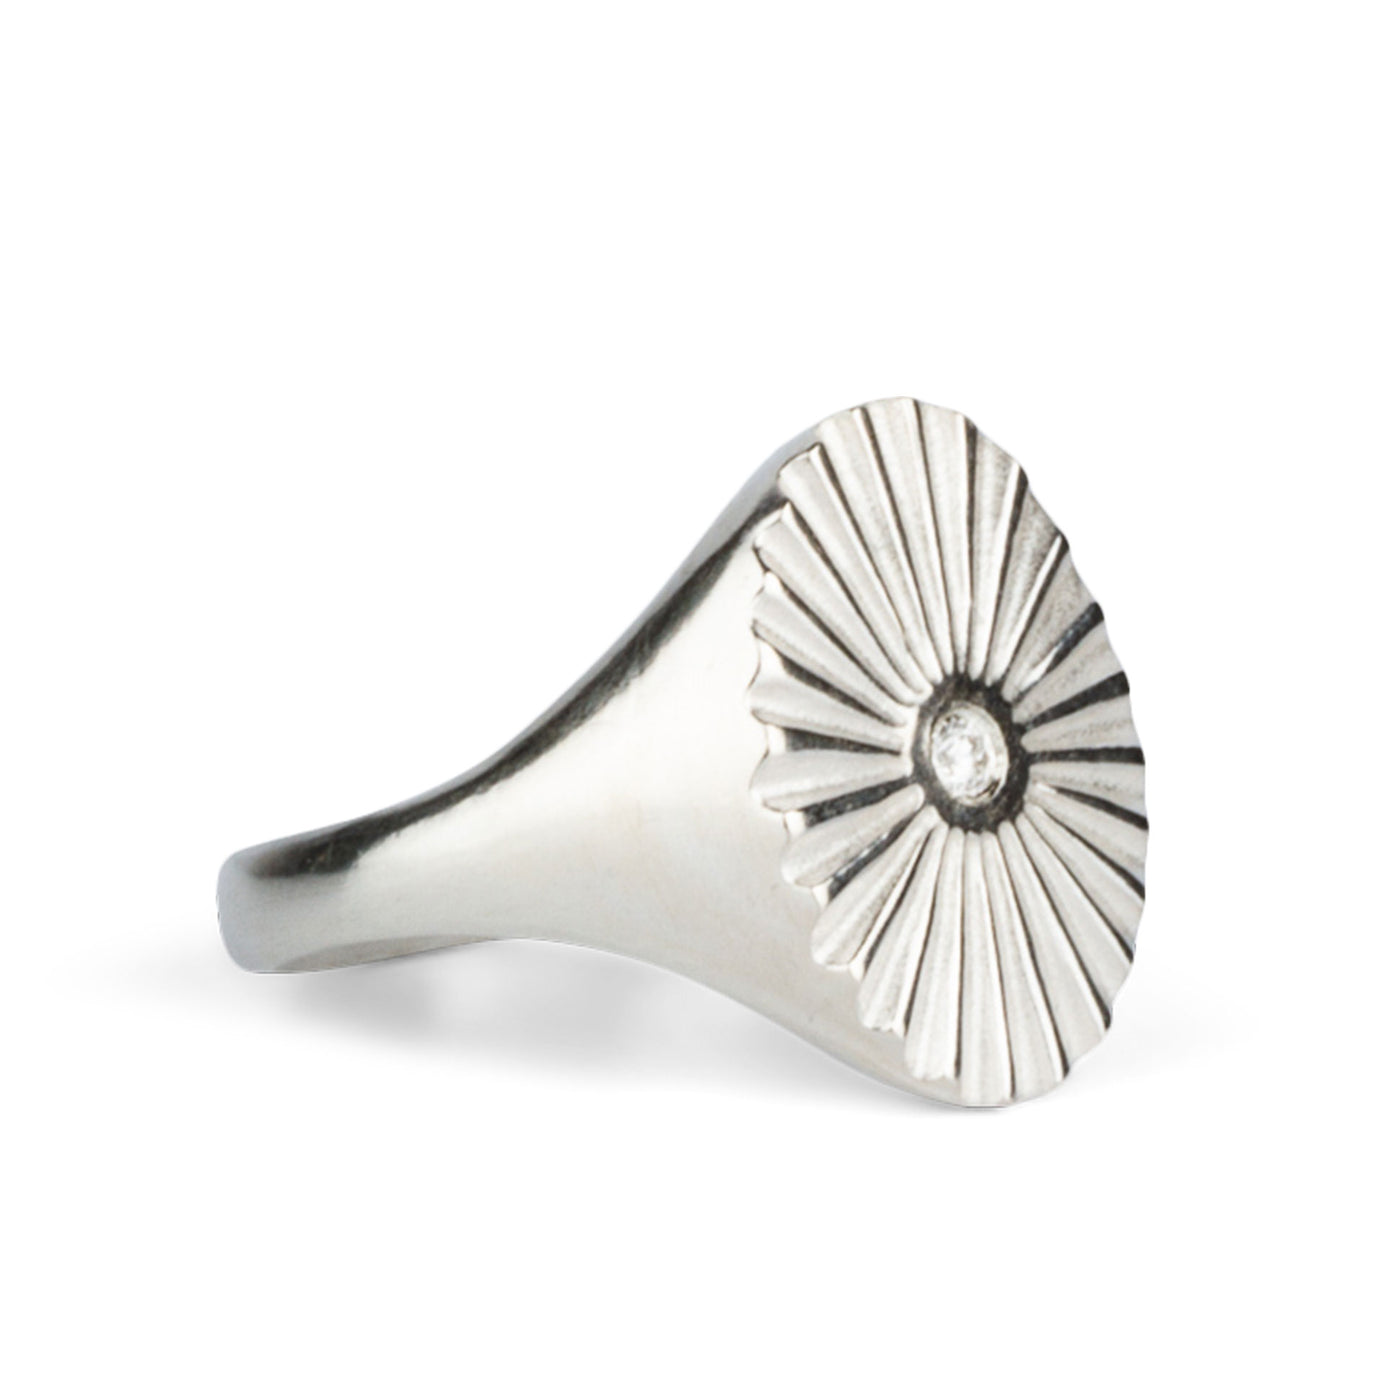 Alternate side view of Large silver oval signet ring with a carved sunburst pattern and diamond center on a white background